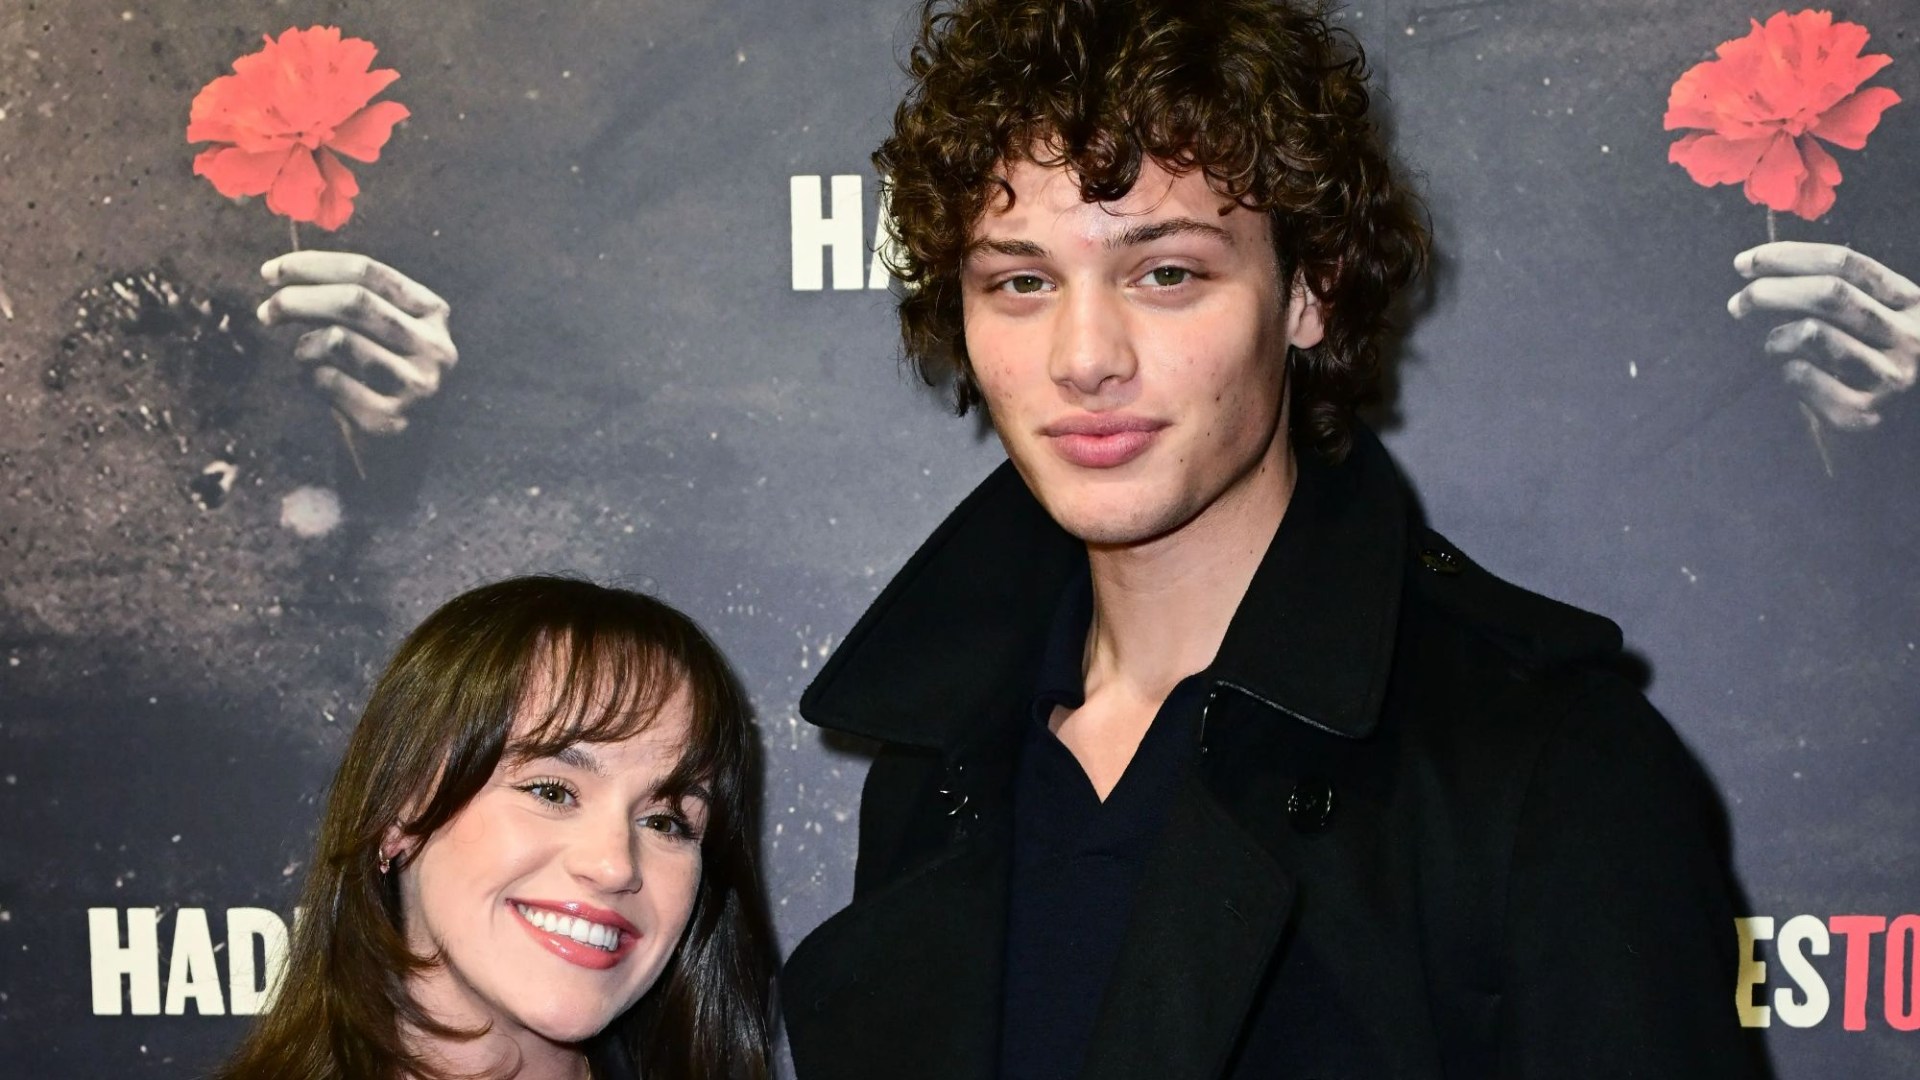 Ellie Leach reveals Bobby Brazier’s surprising stance on proposing after Strictly tour